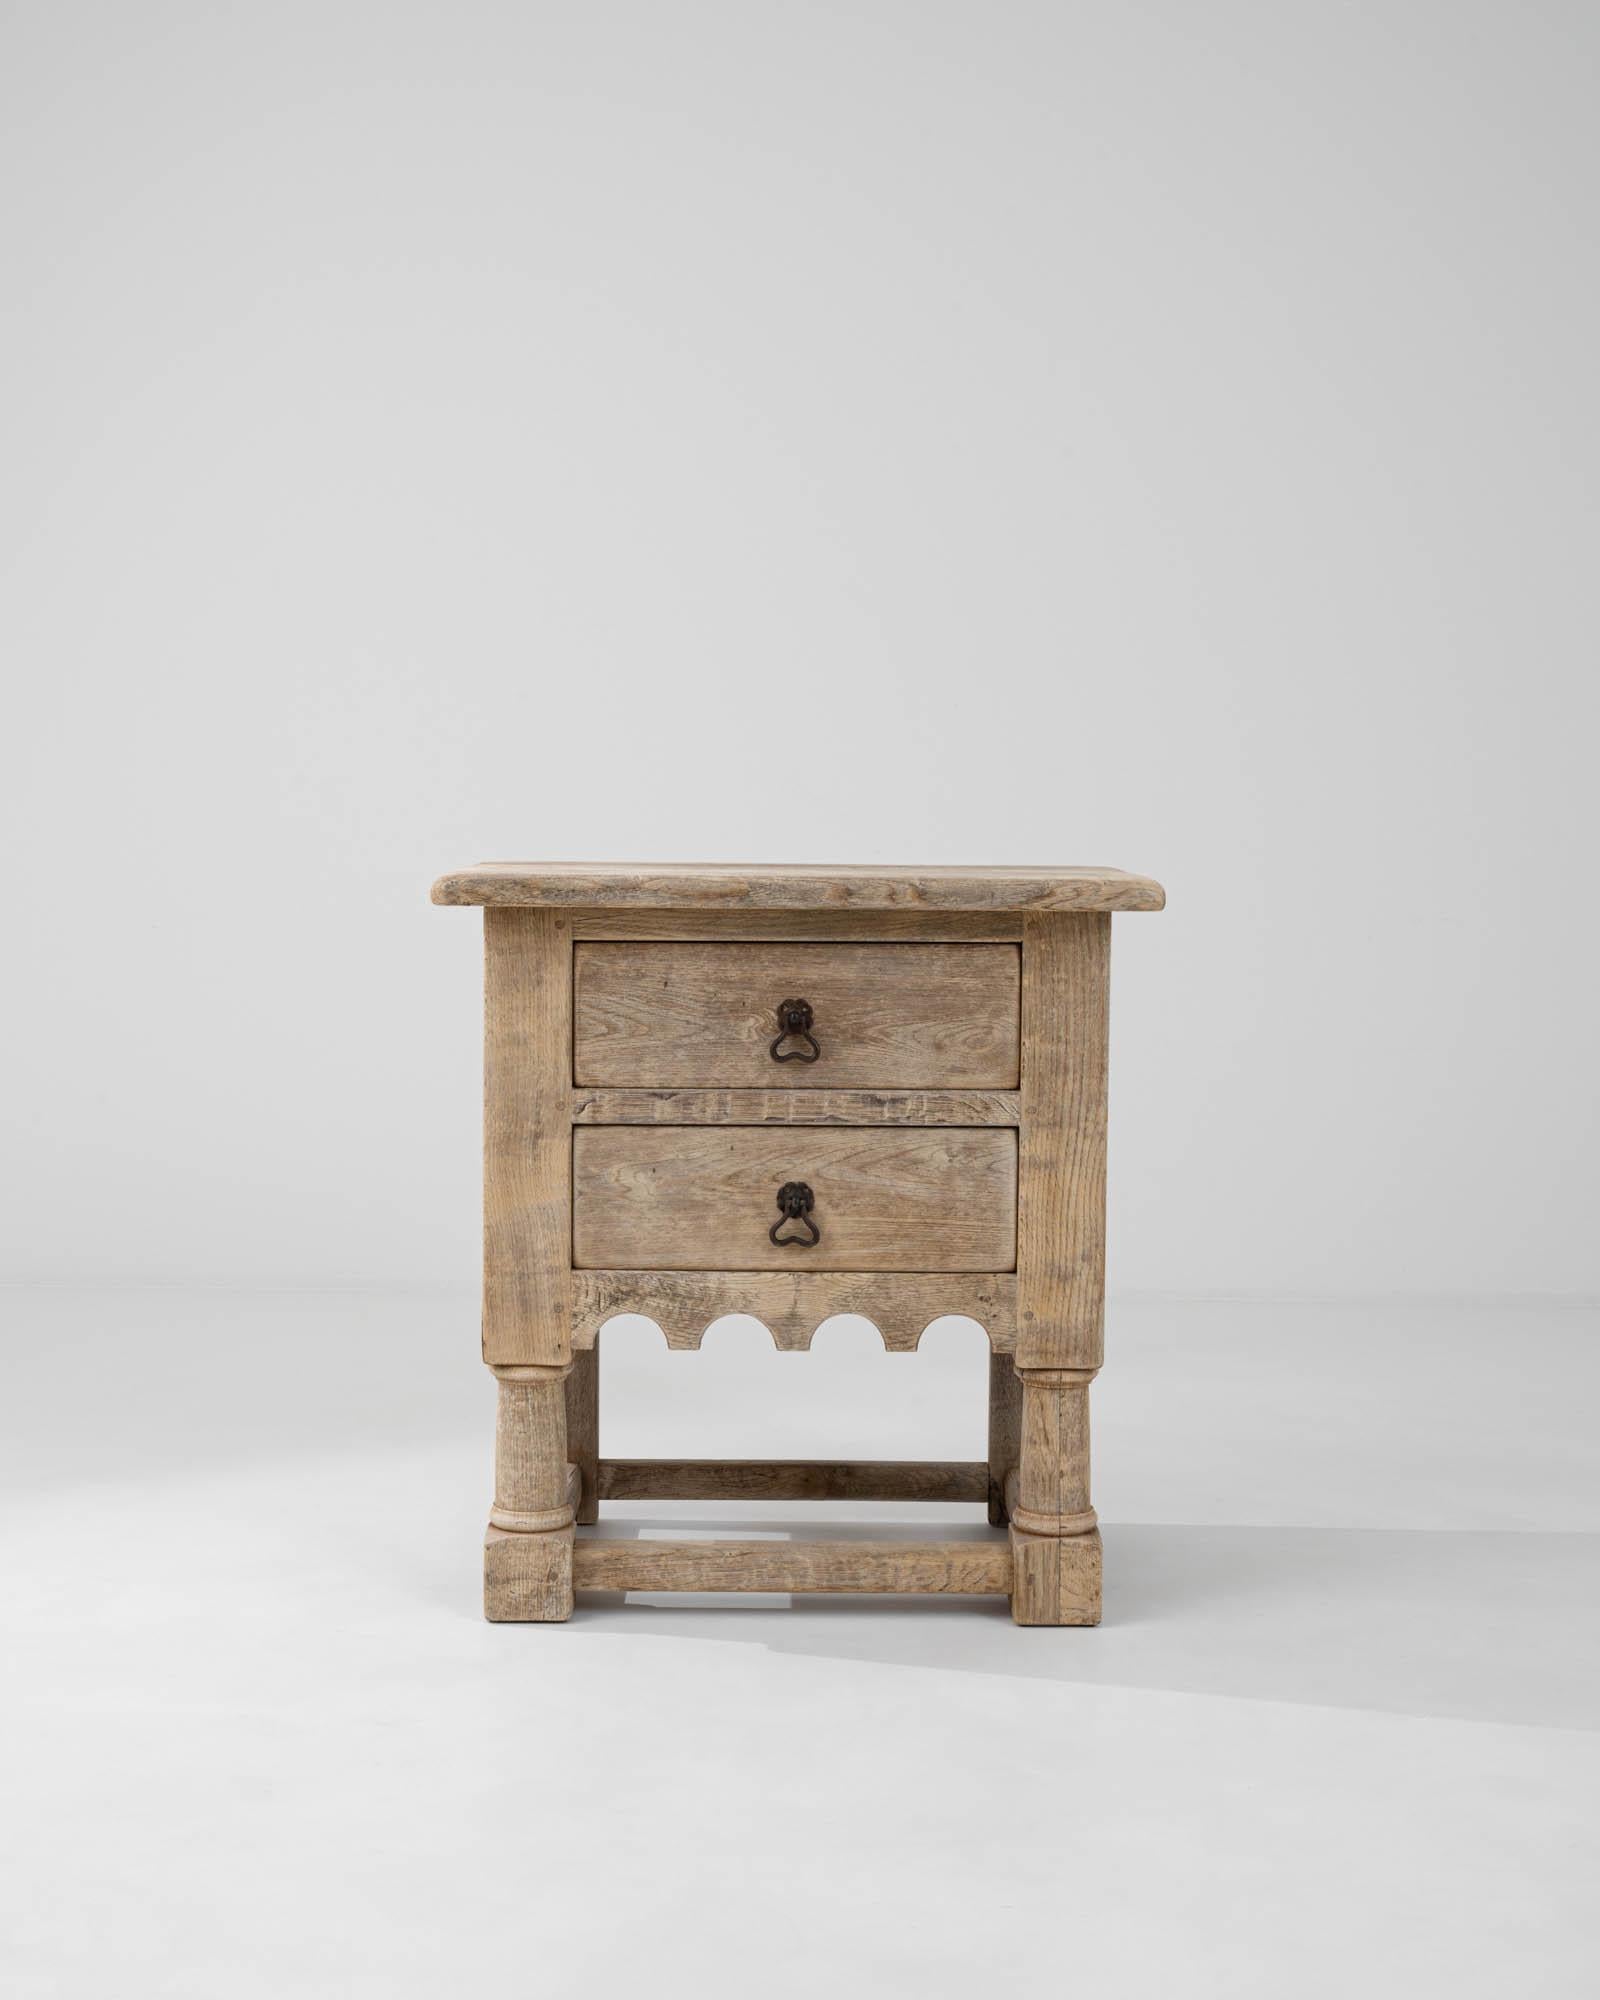 This 20th Century Belgian Bleached Oak Chest of Drawers exudes a timeless charm that complements any interior décor. Crafted from solid oak with a lovely bleached finish, this piece highlights the natural beauty and distinct grain of the wood,